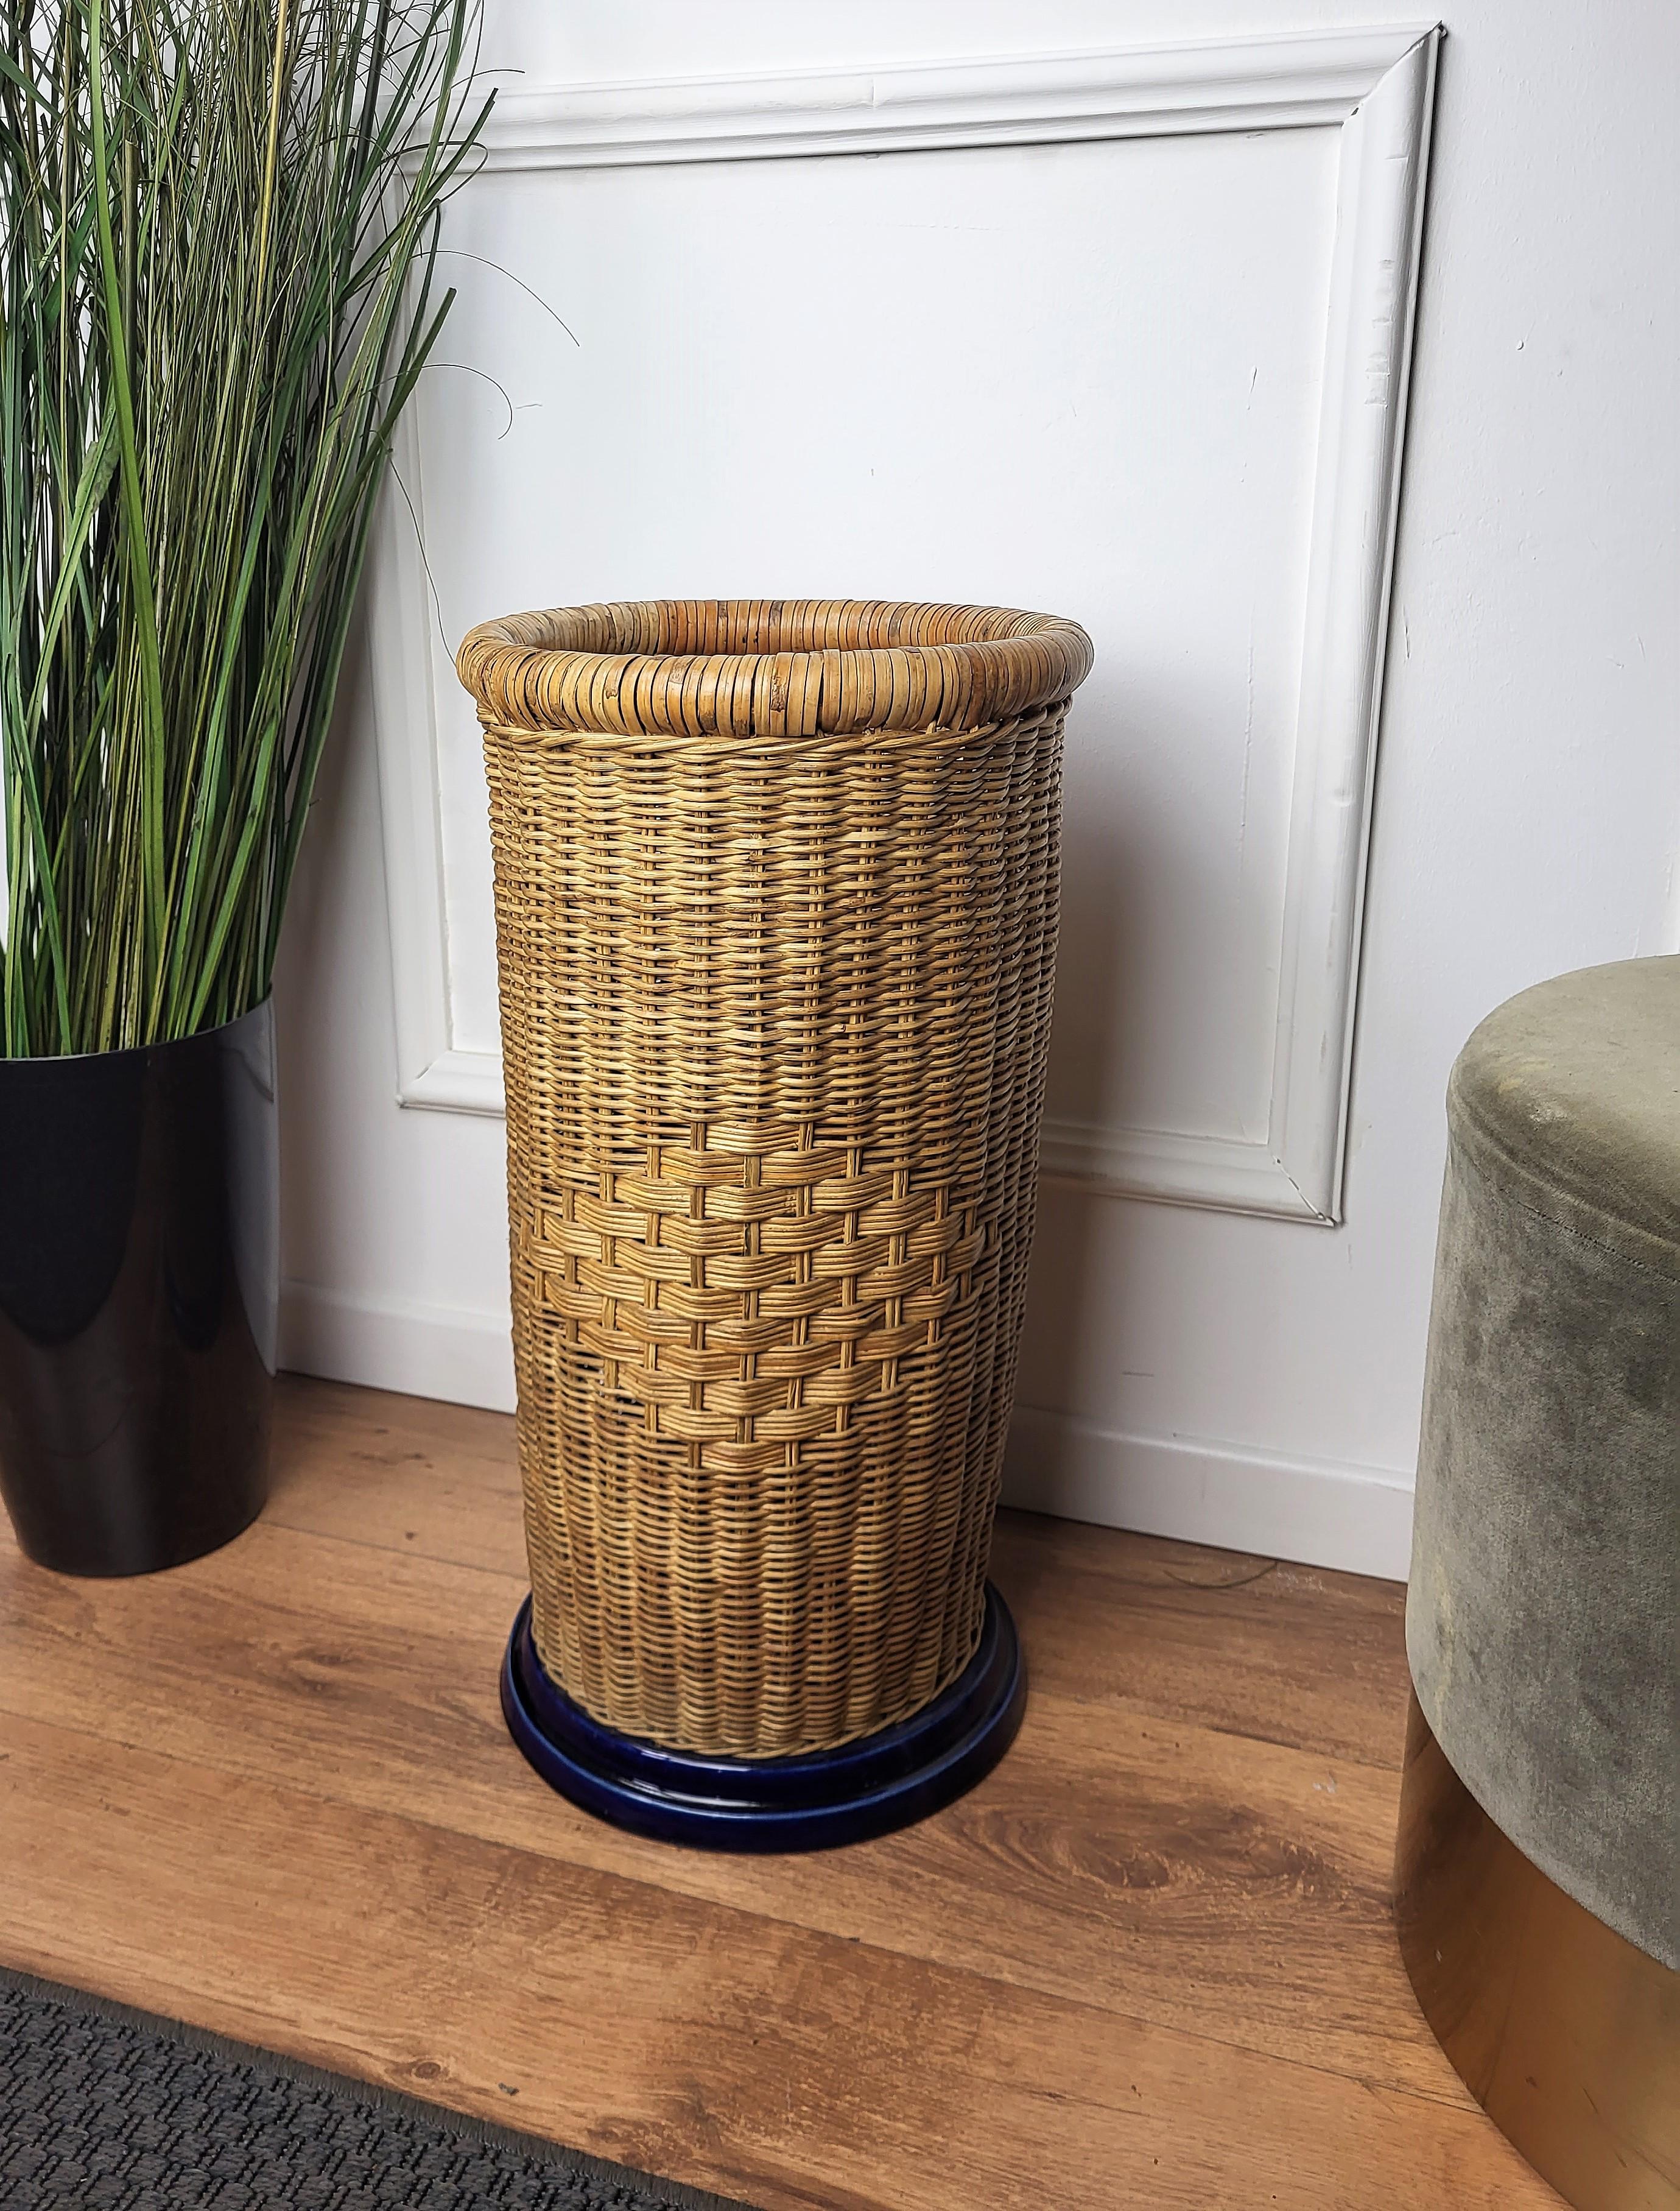 Beautiful 1960s Italian Mid-Century Modern umbrella stand rack with nice blue ceramic base. This charming piece is in the typical style of Audoux and Minet where the organic beauty of the woven materials is timeless and Classic, making bamboo and